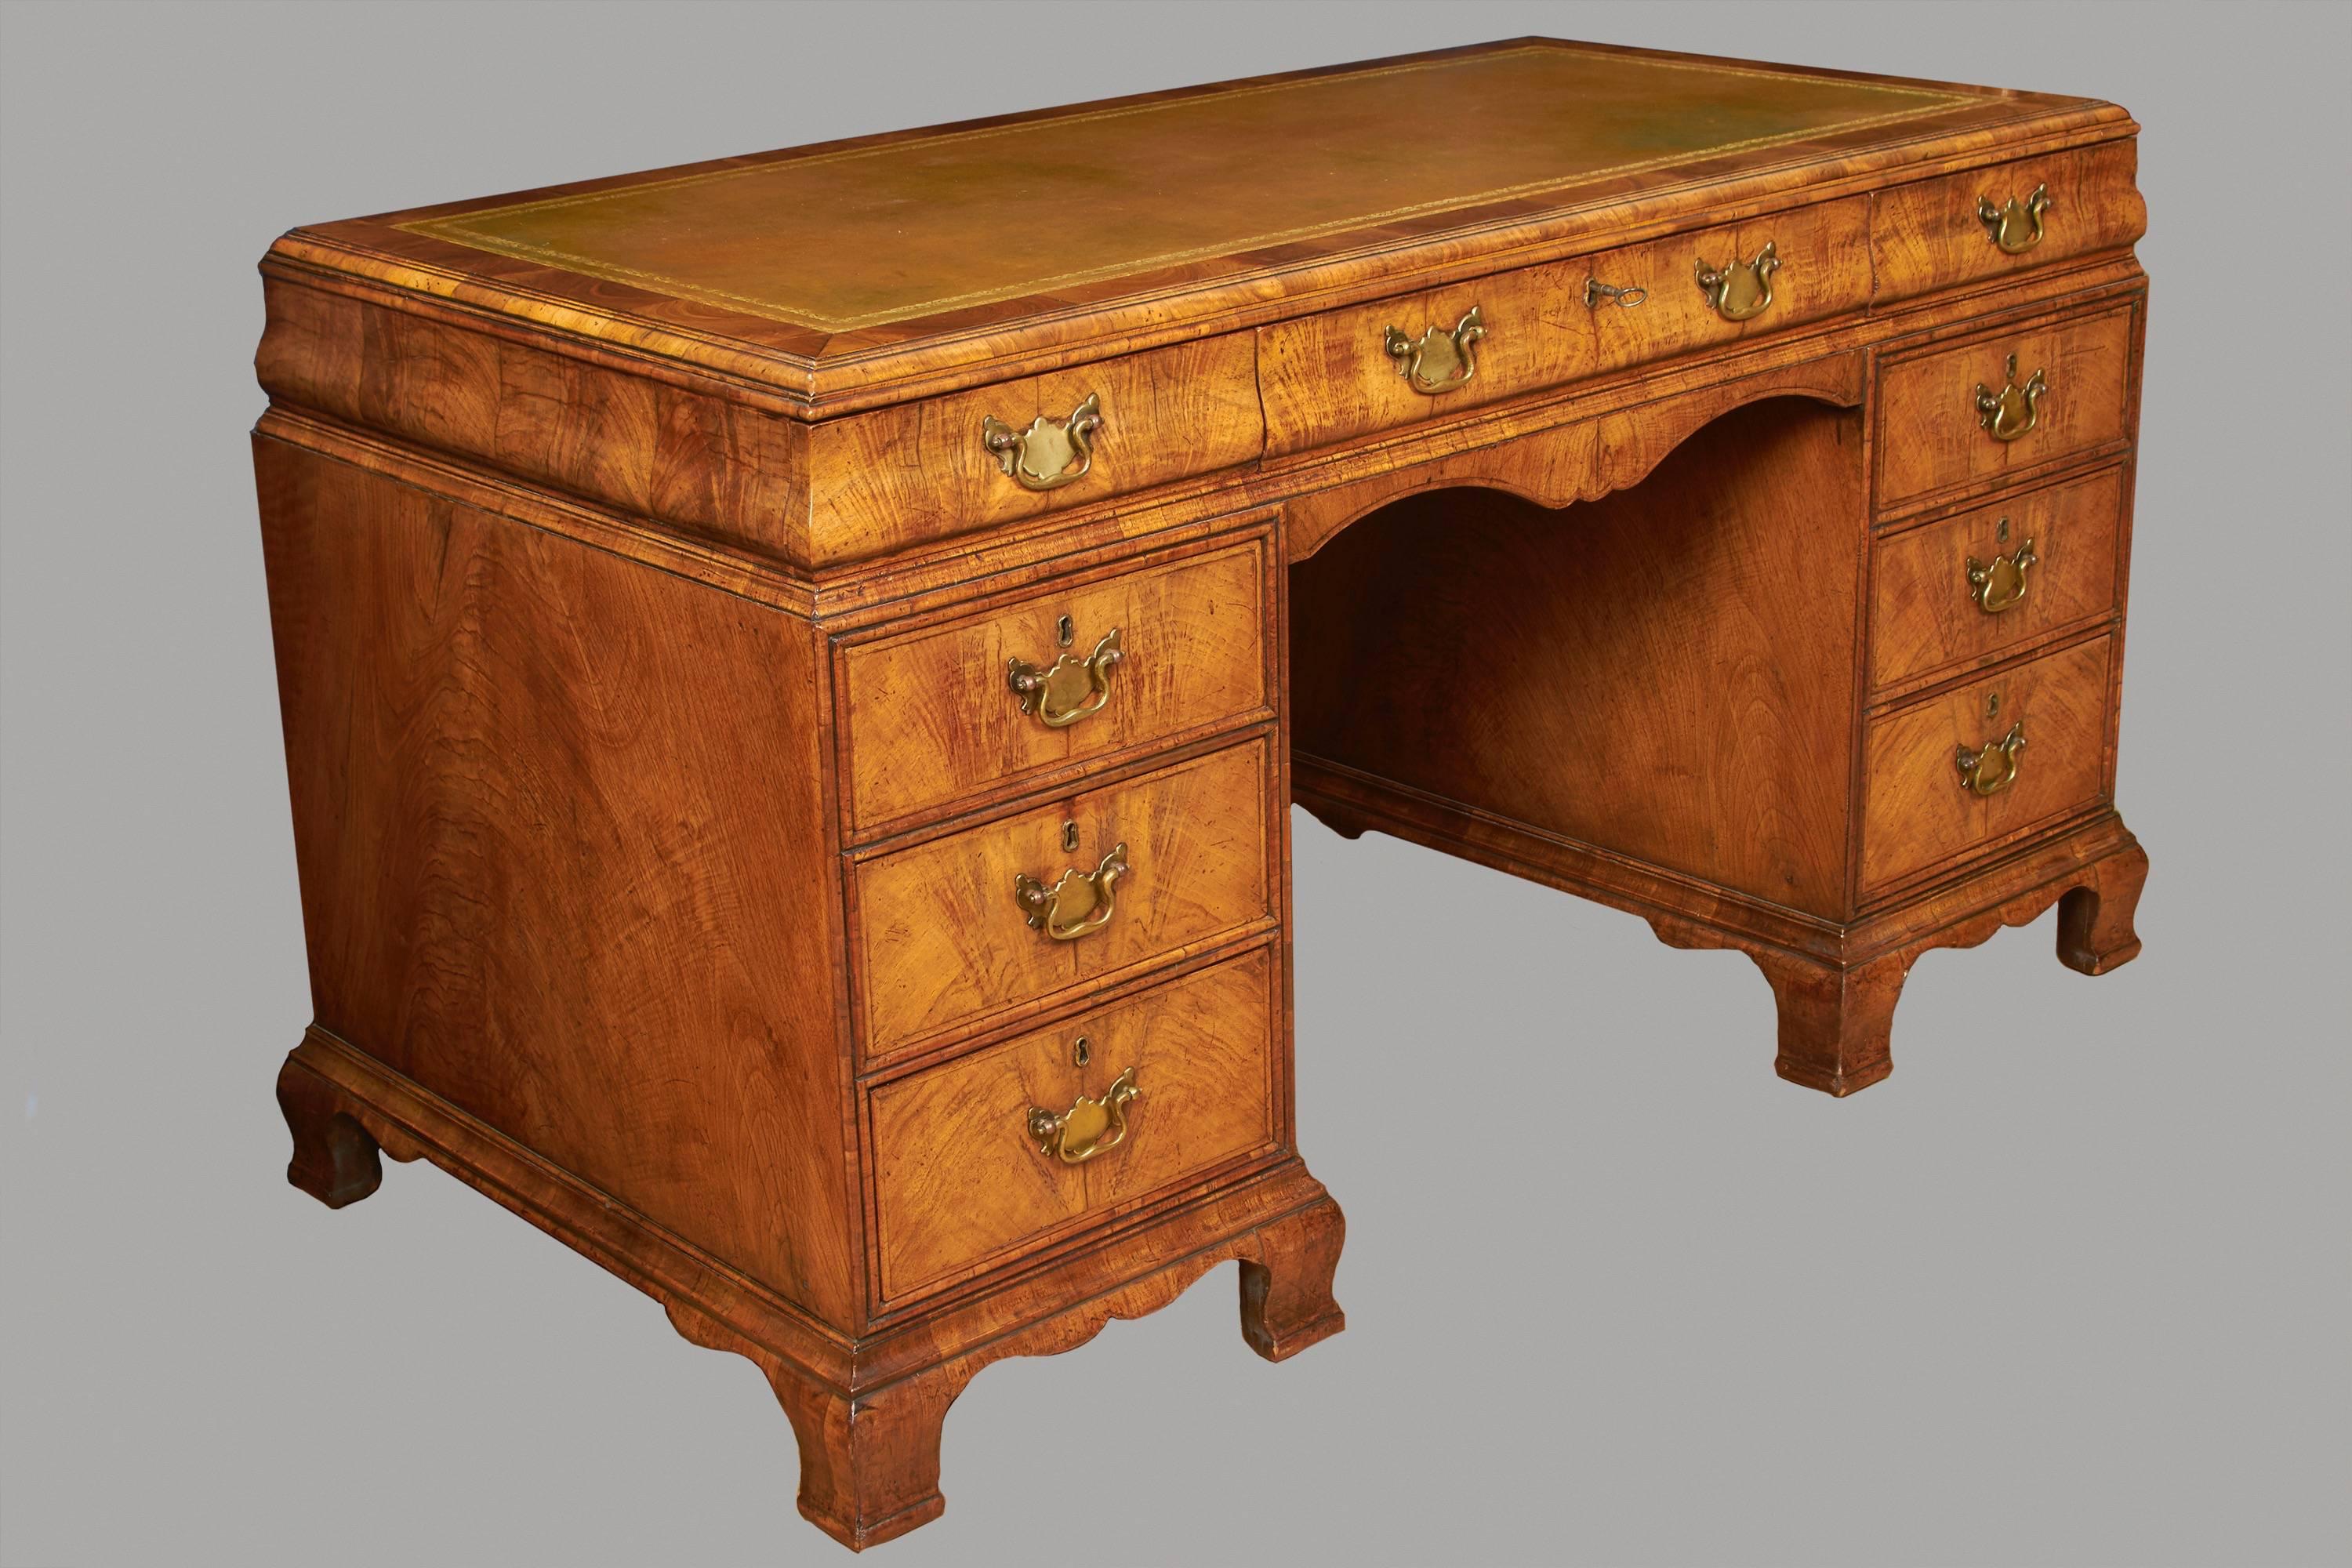 An English burl walnut pedestal desk of attractive size with a gilt-tooled leather top over three bombe frieze drawers and kneehole apron above flanking sets of three short drawers with a paneled back, all supported on ogee bracket feet, early 20th